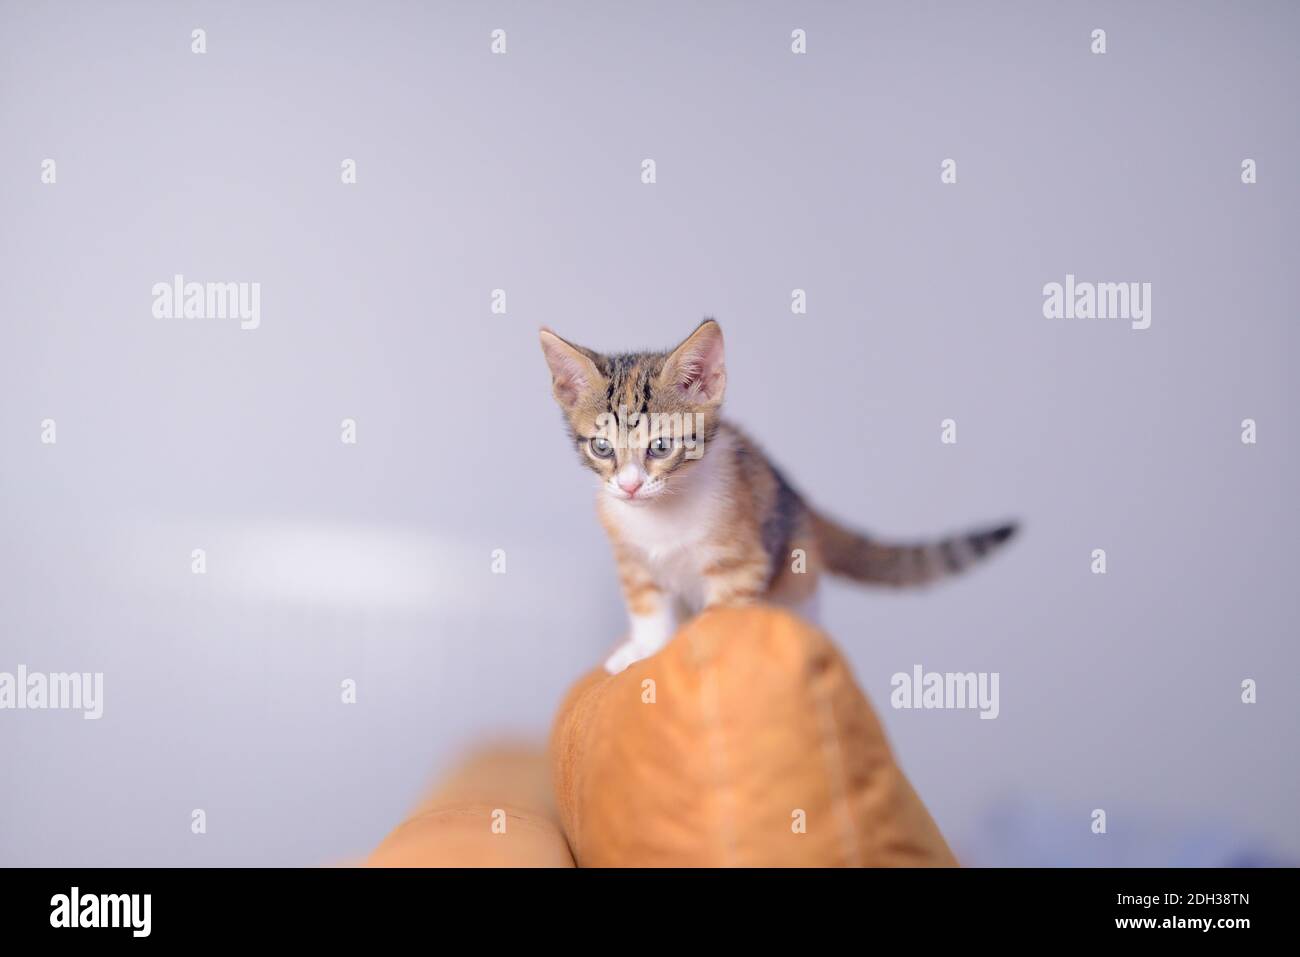 One month old baby kitten looking curious Stock Photo